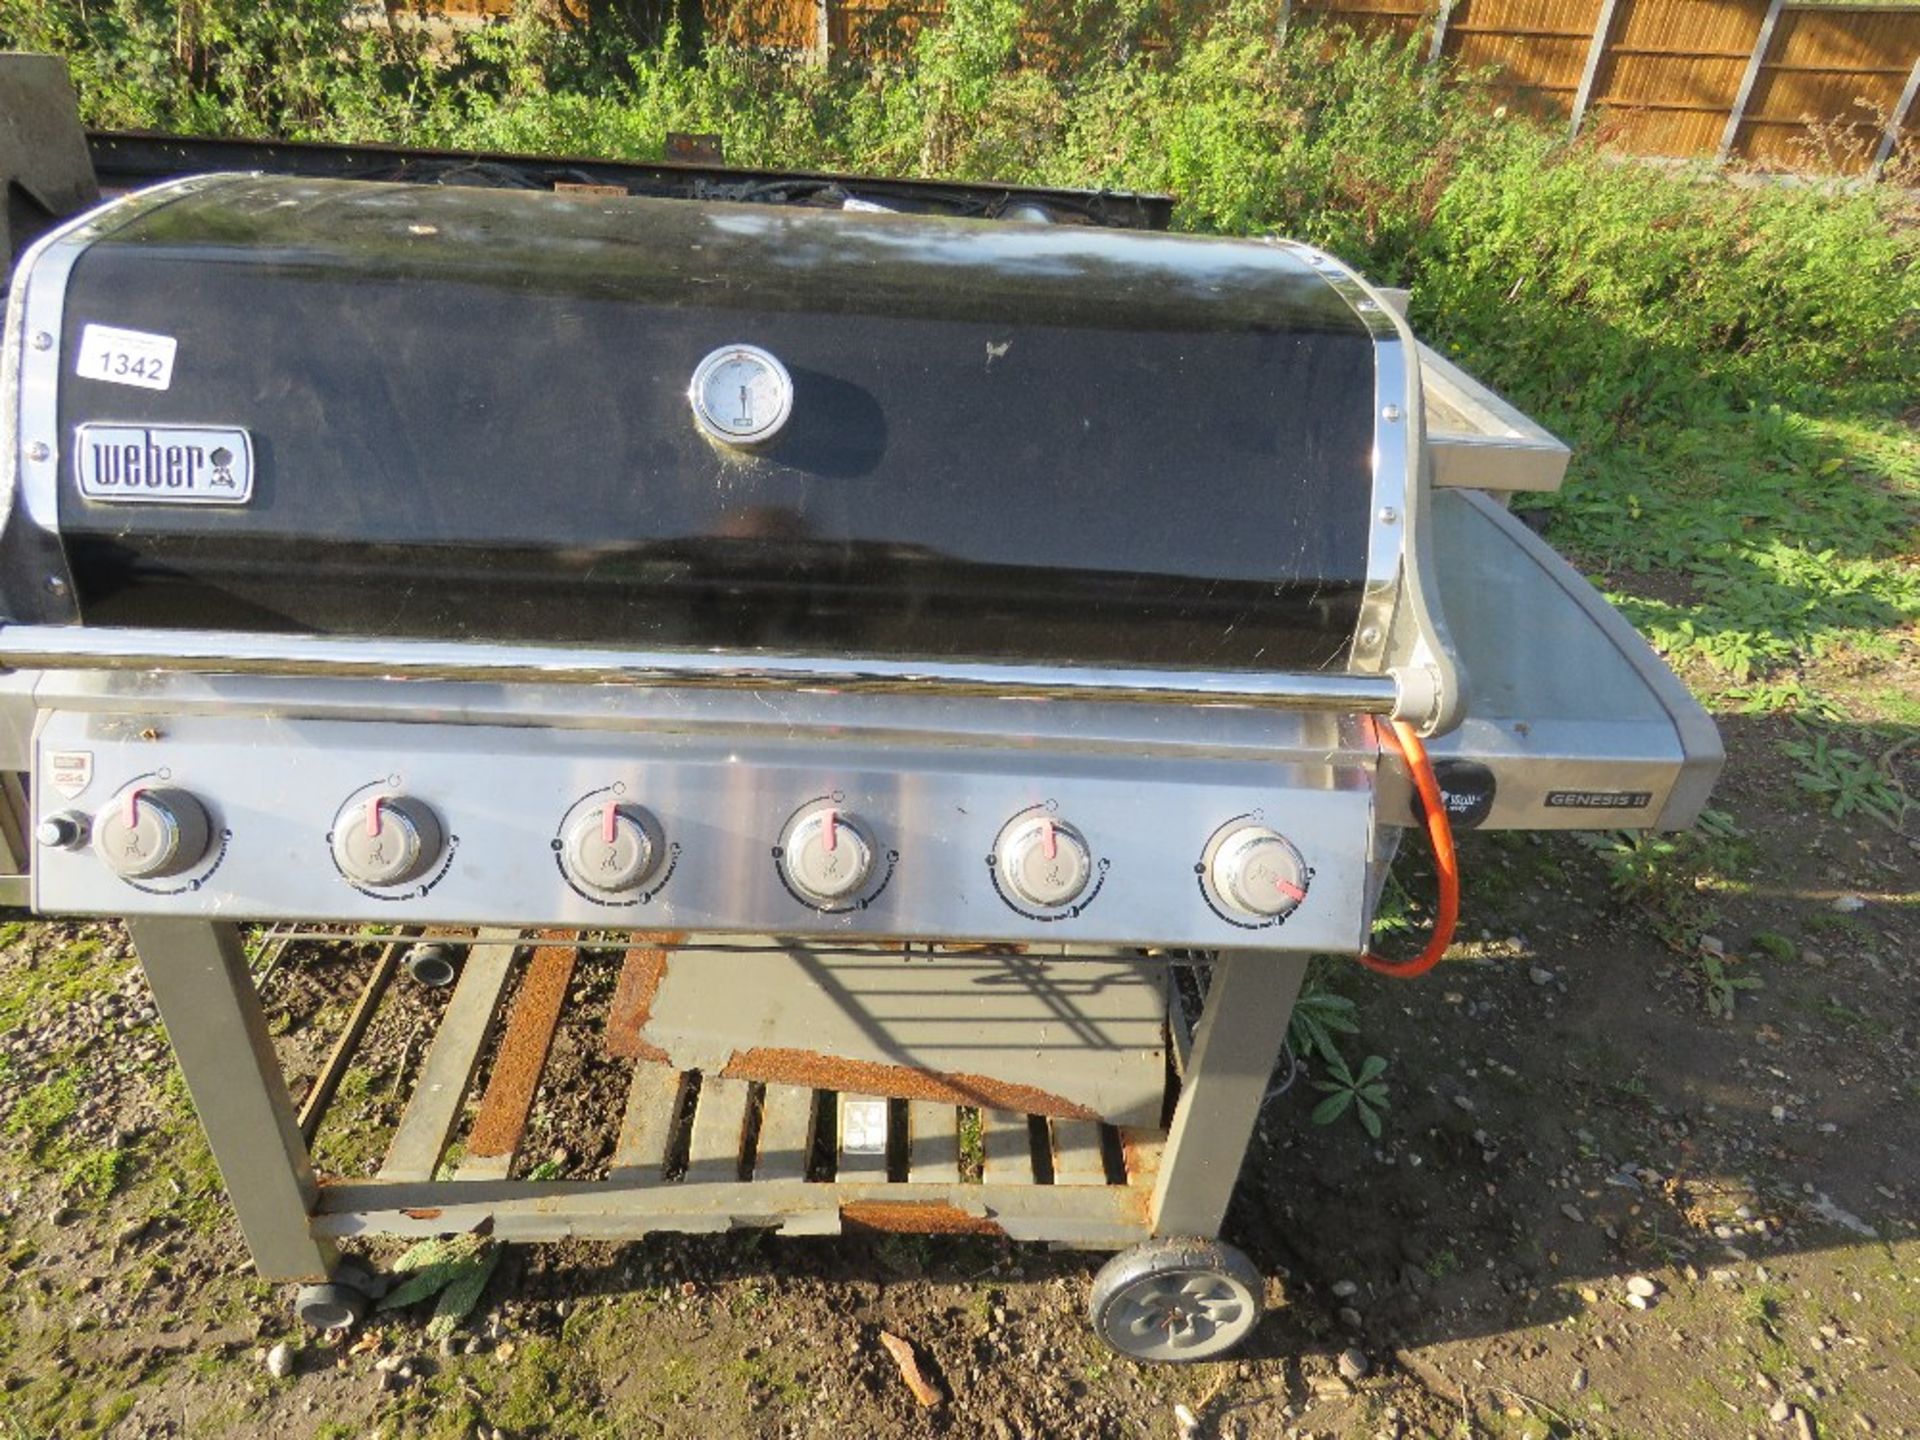 3X INDUSTRIAL BARBEQUES AND STAINLESS STEEL SINK UNIT. THIS LOT IS SOLD UNDER THE AUCTIONEERS MA - Image 2 of 6